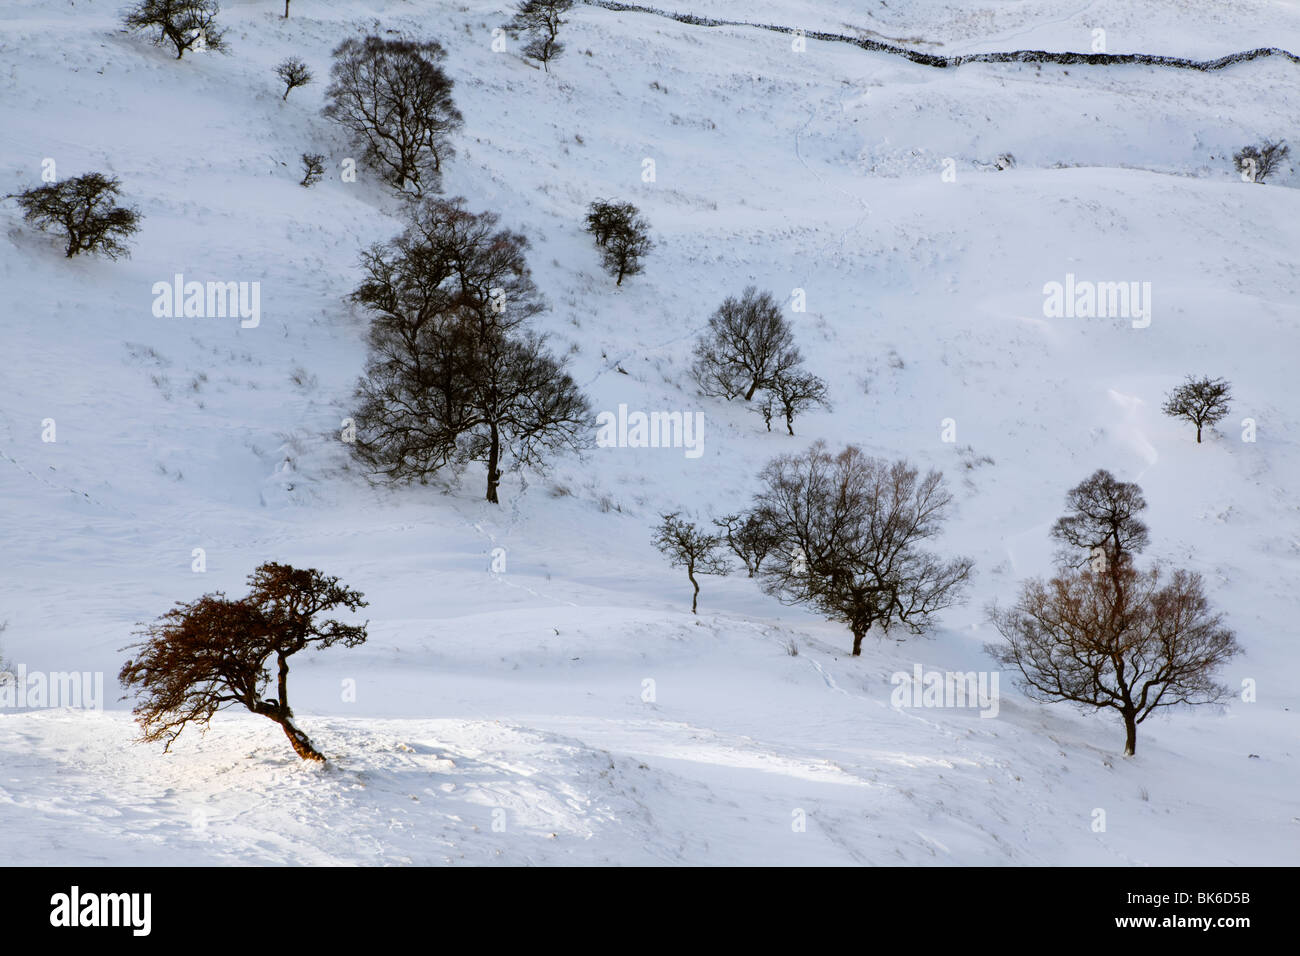 Stark Bare Trees in a Snowy Edale Valley, The Peak District National Park, UK, England Stock Photo